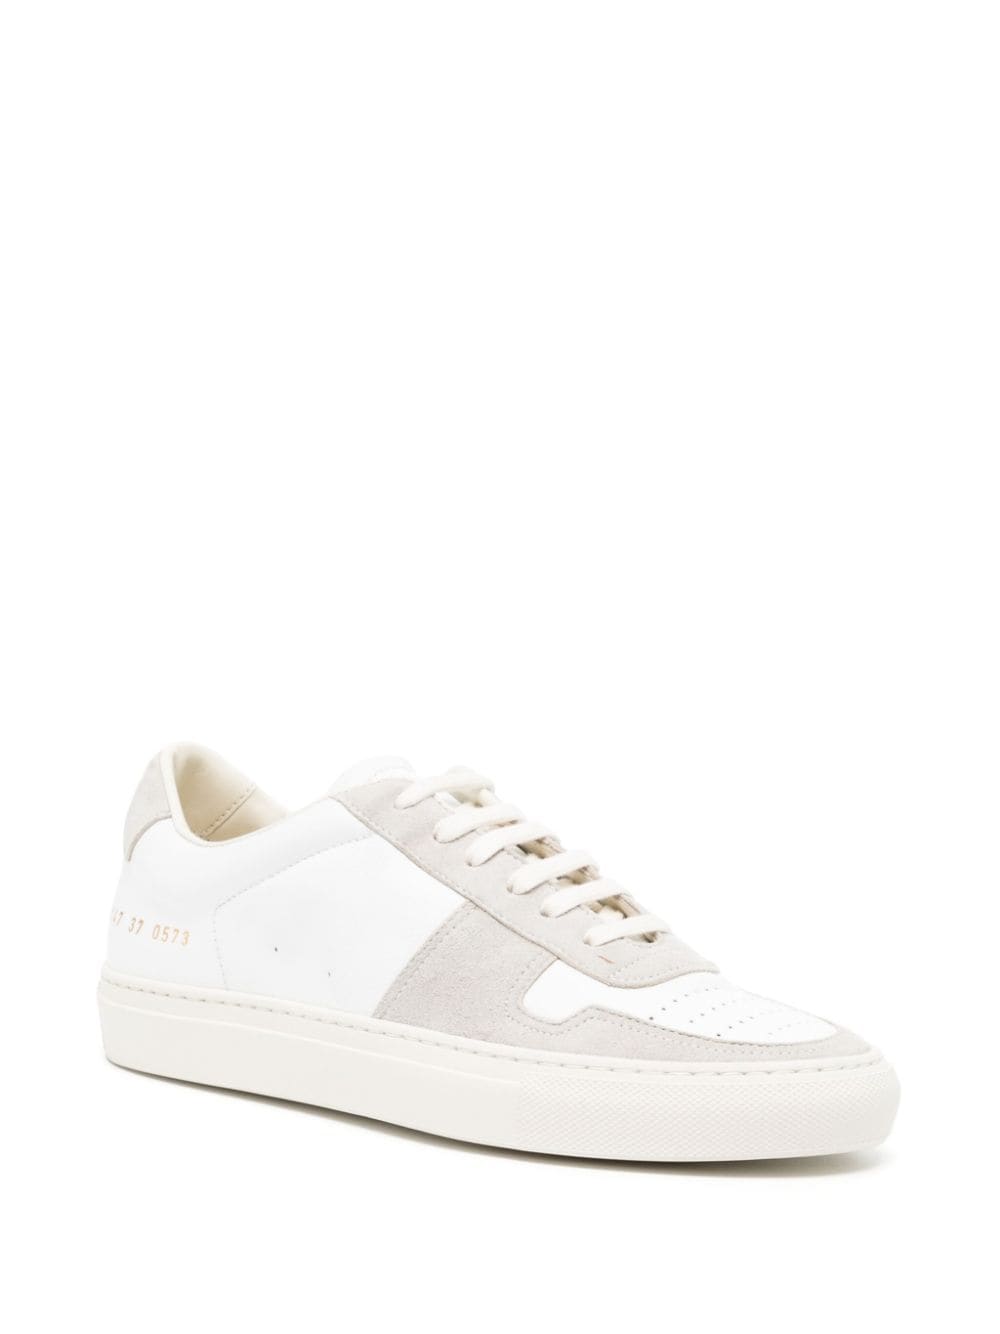 Image 2 of Common Projects Bball panelled sneakers